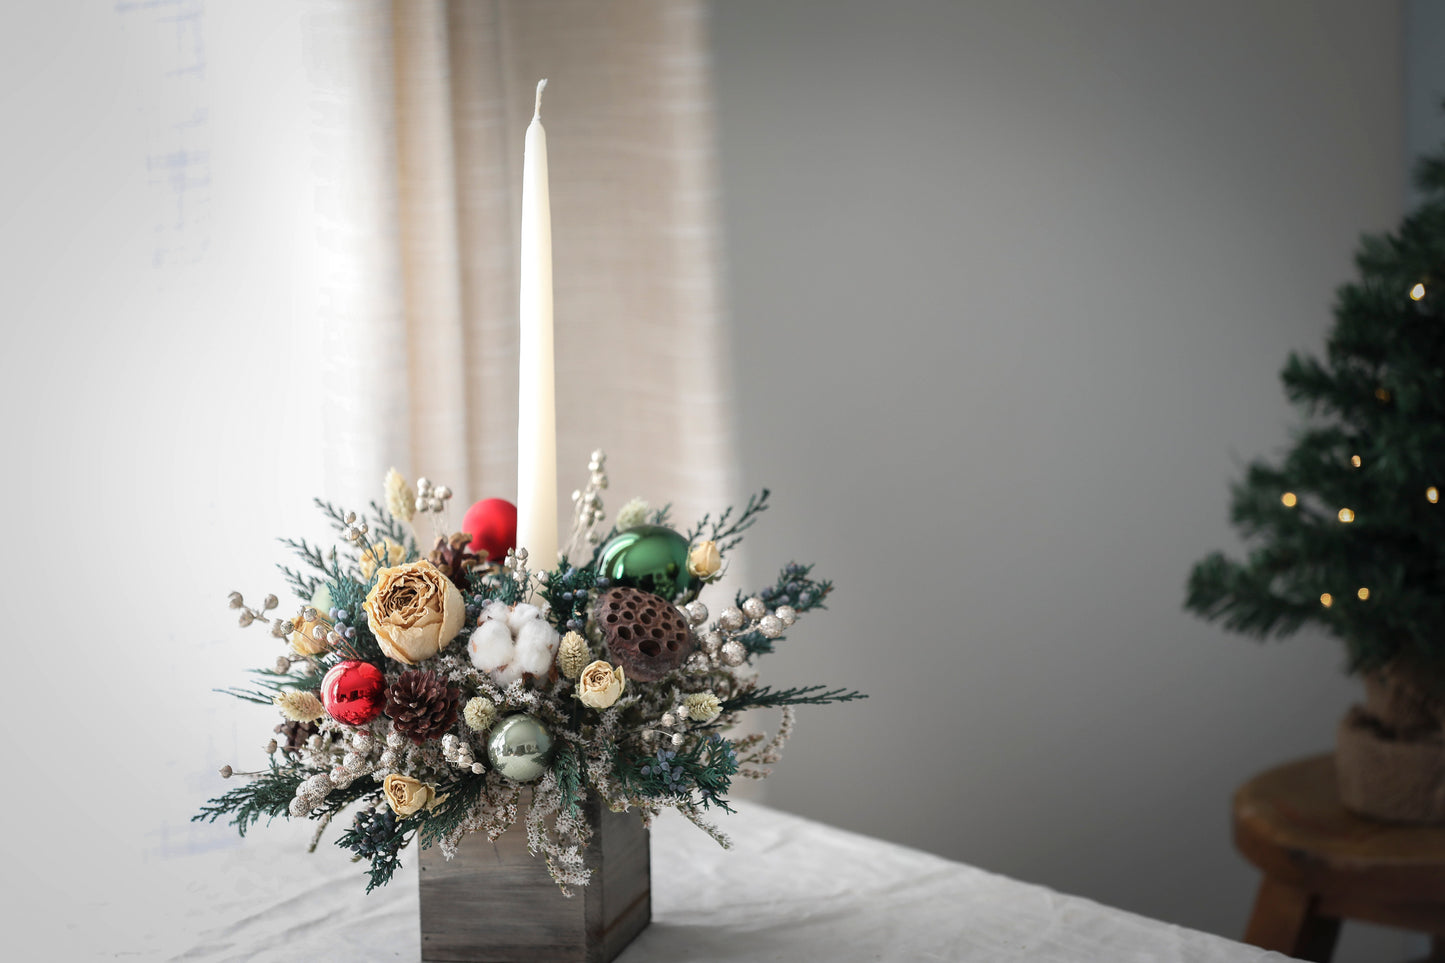 Dried Flowers & Ornaments Candle Centerpiece